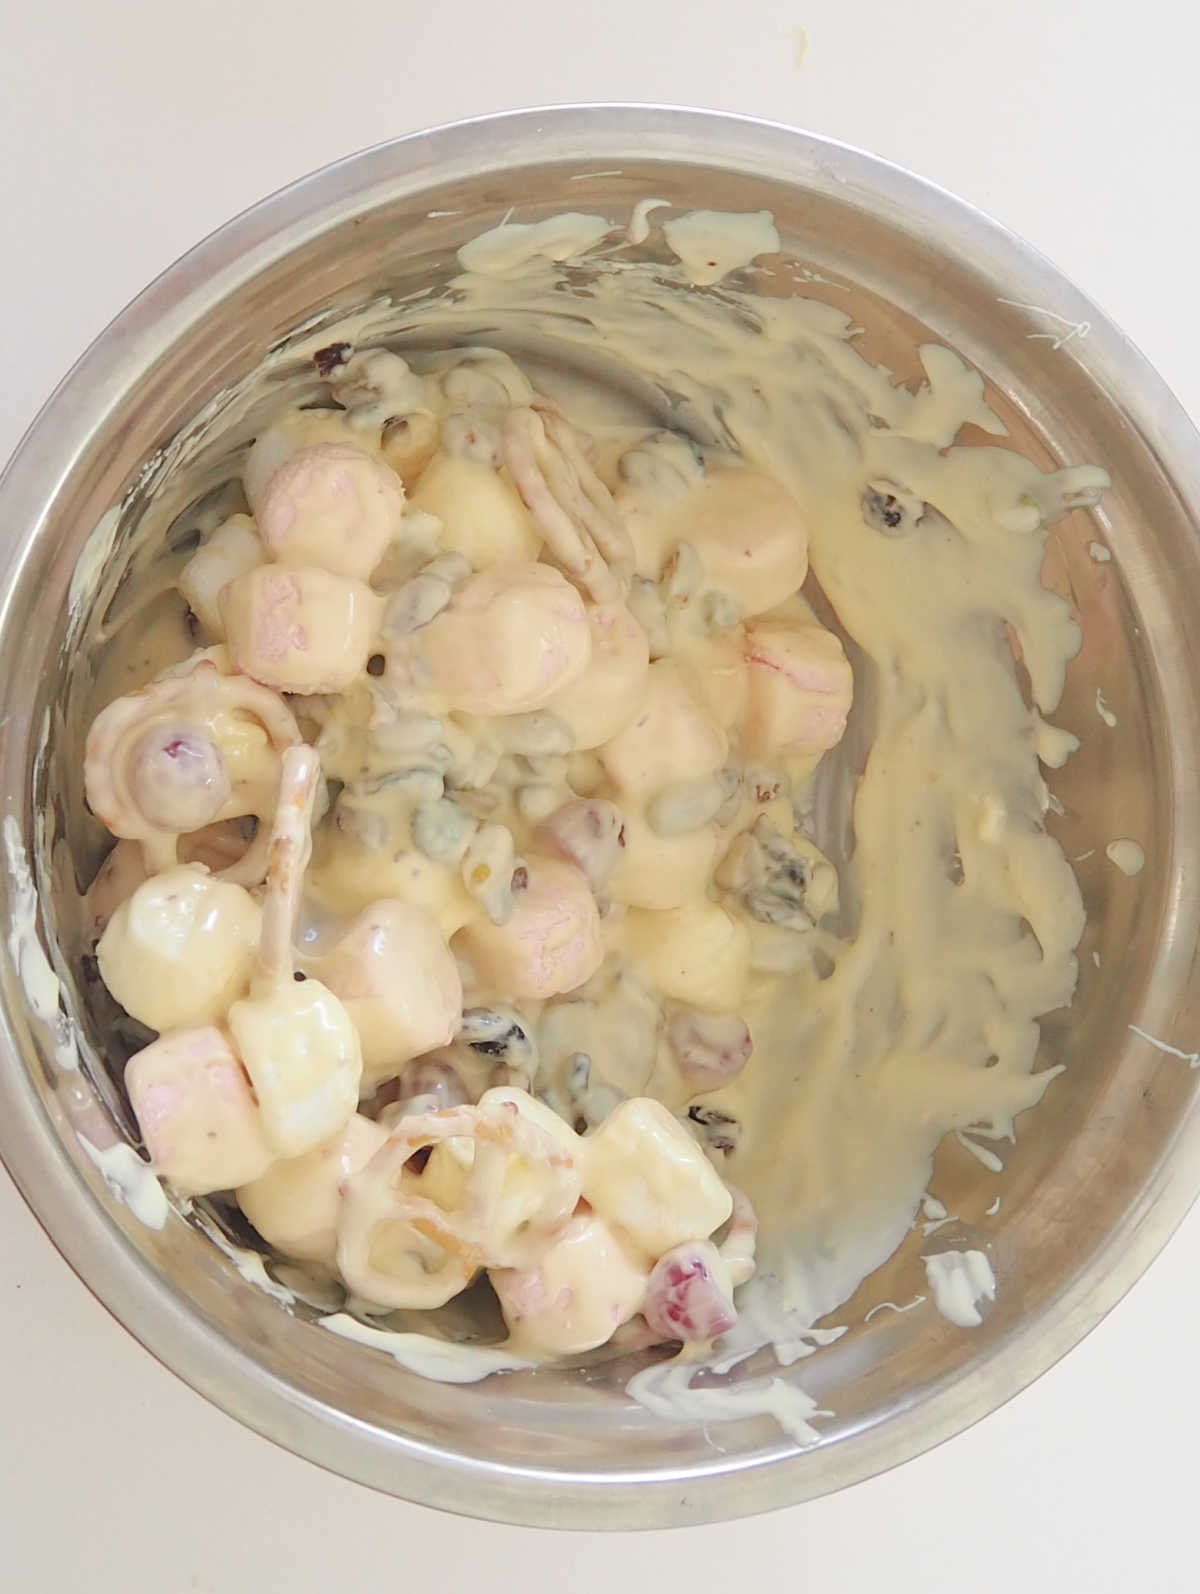 White Chocolate Rocky Road mixture in a metal bowl stirred together.